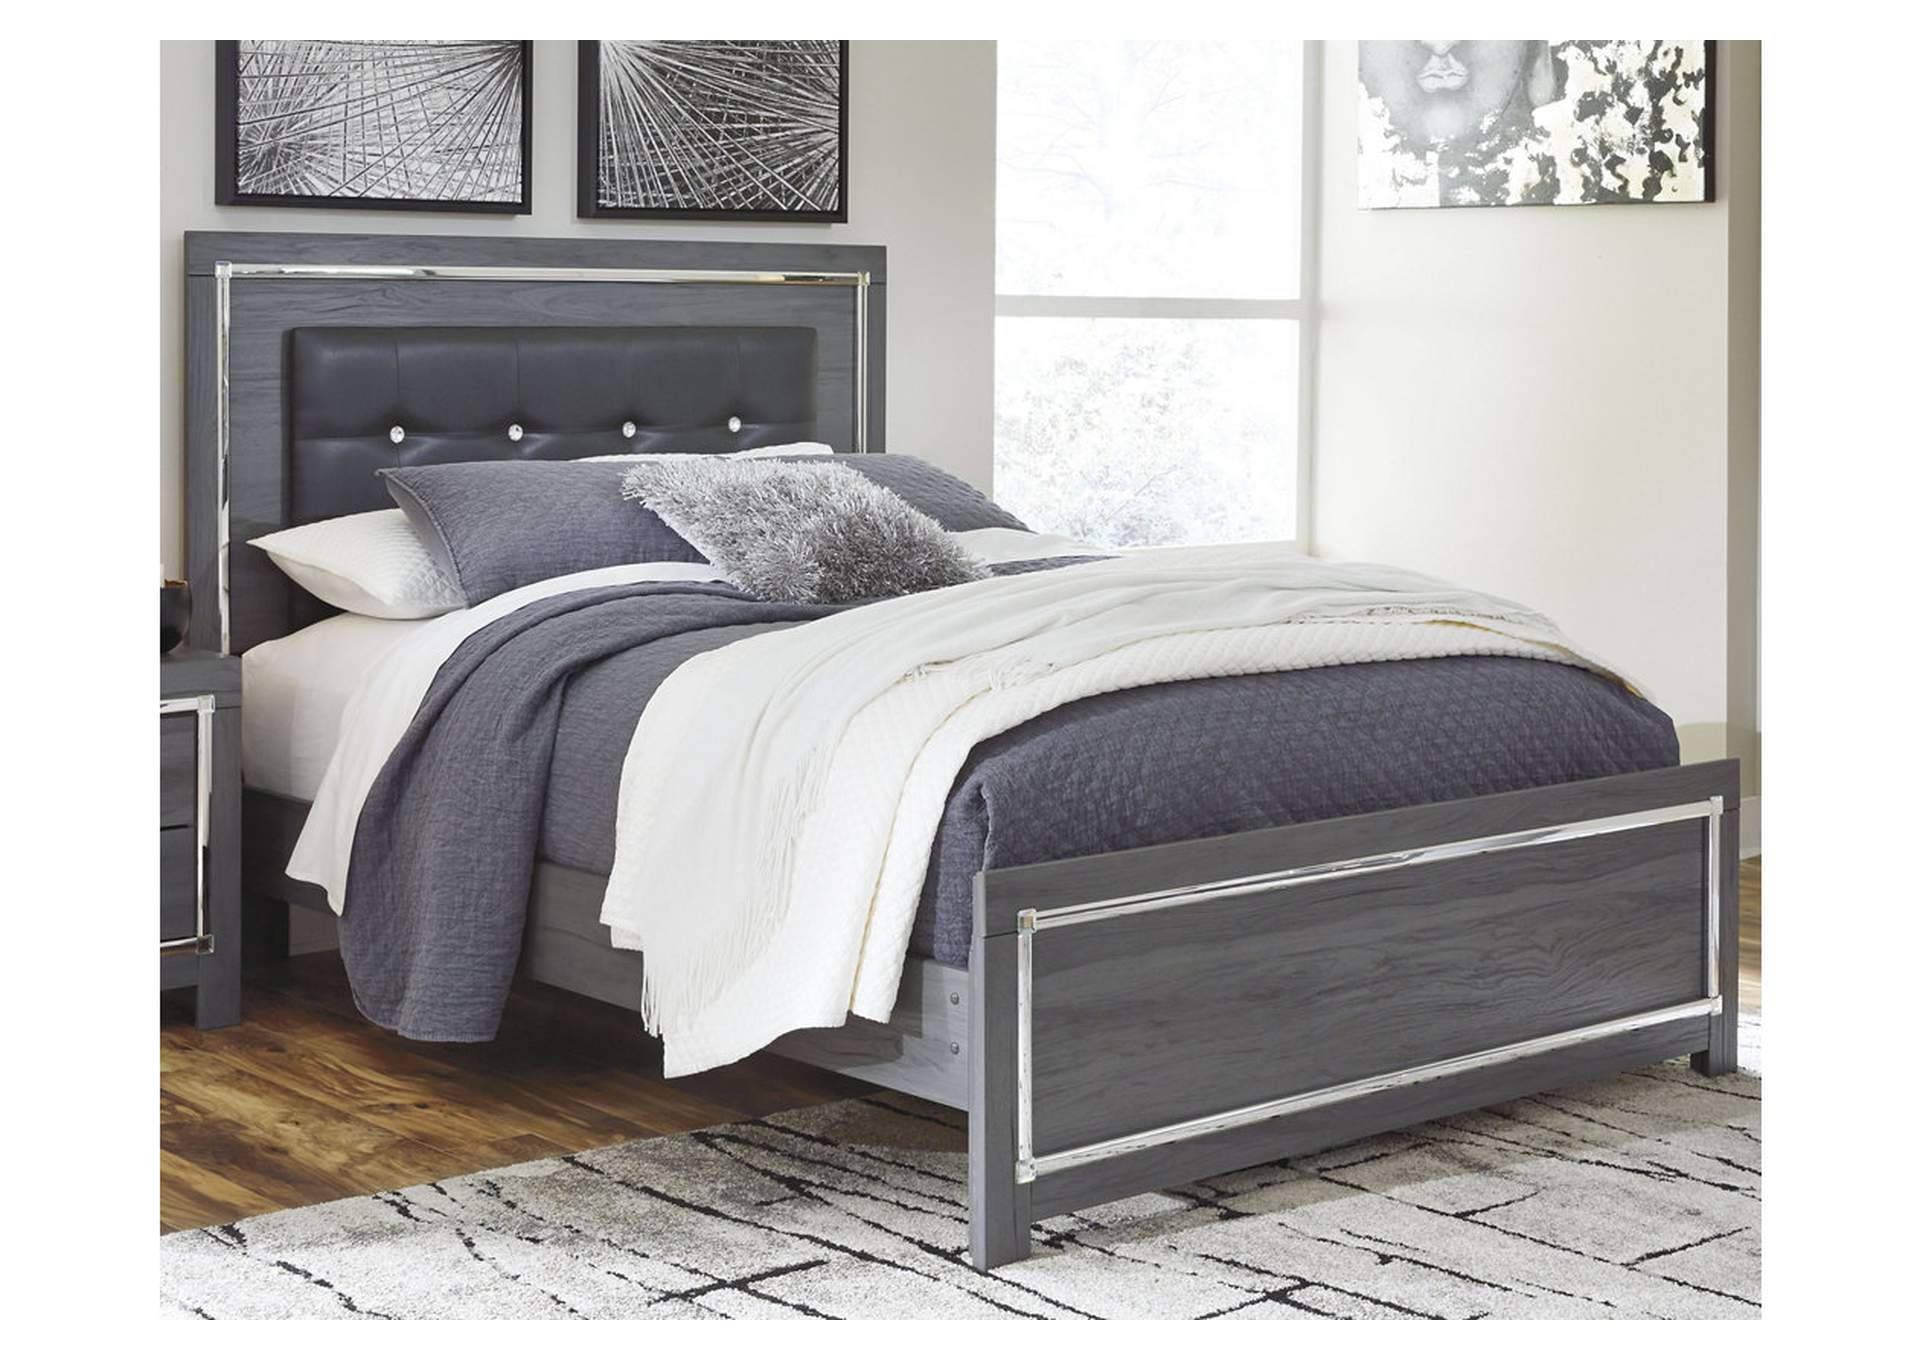 Lodanna Queen Upholstered Panel Bed, Dresser, Mirror and Nightstand,Signature Design By Ashley